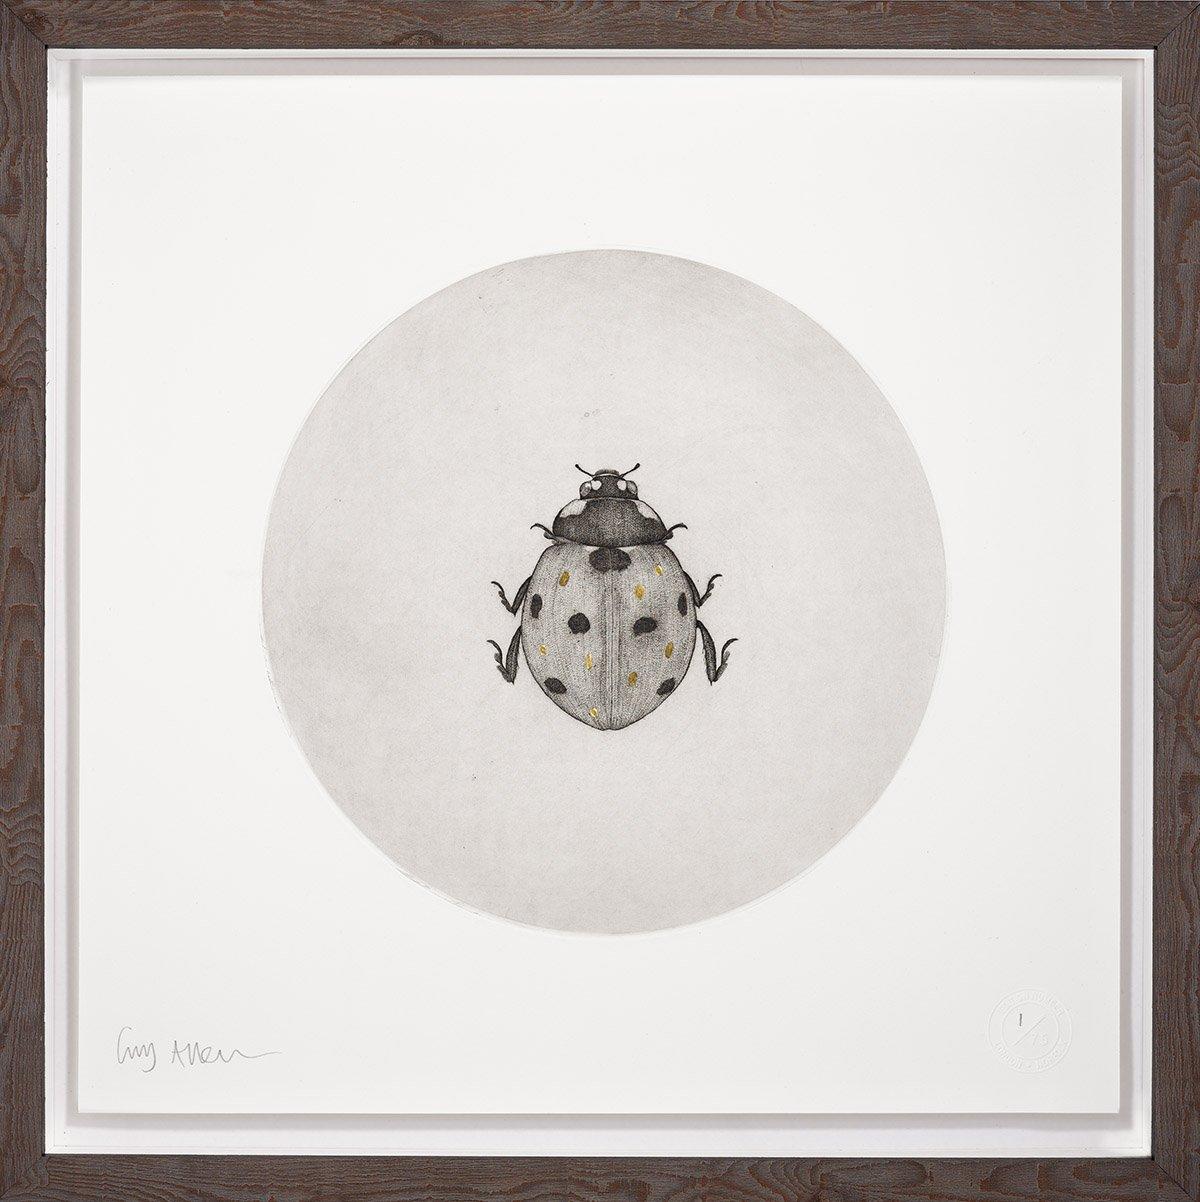 Ladybird by Guy Allen.  Unframed limited edition print from acid etching